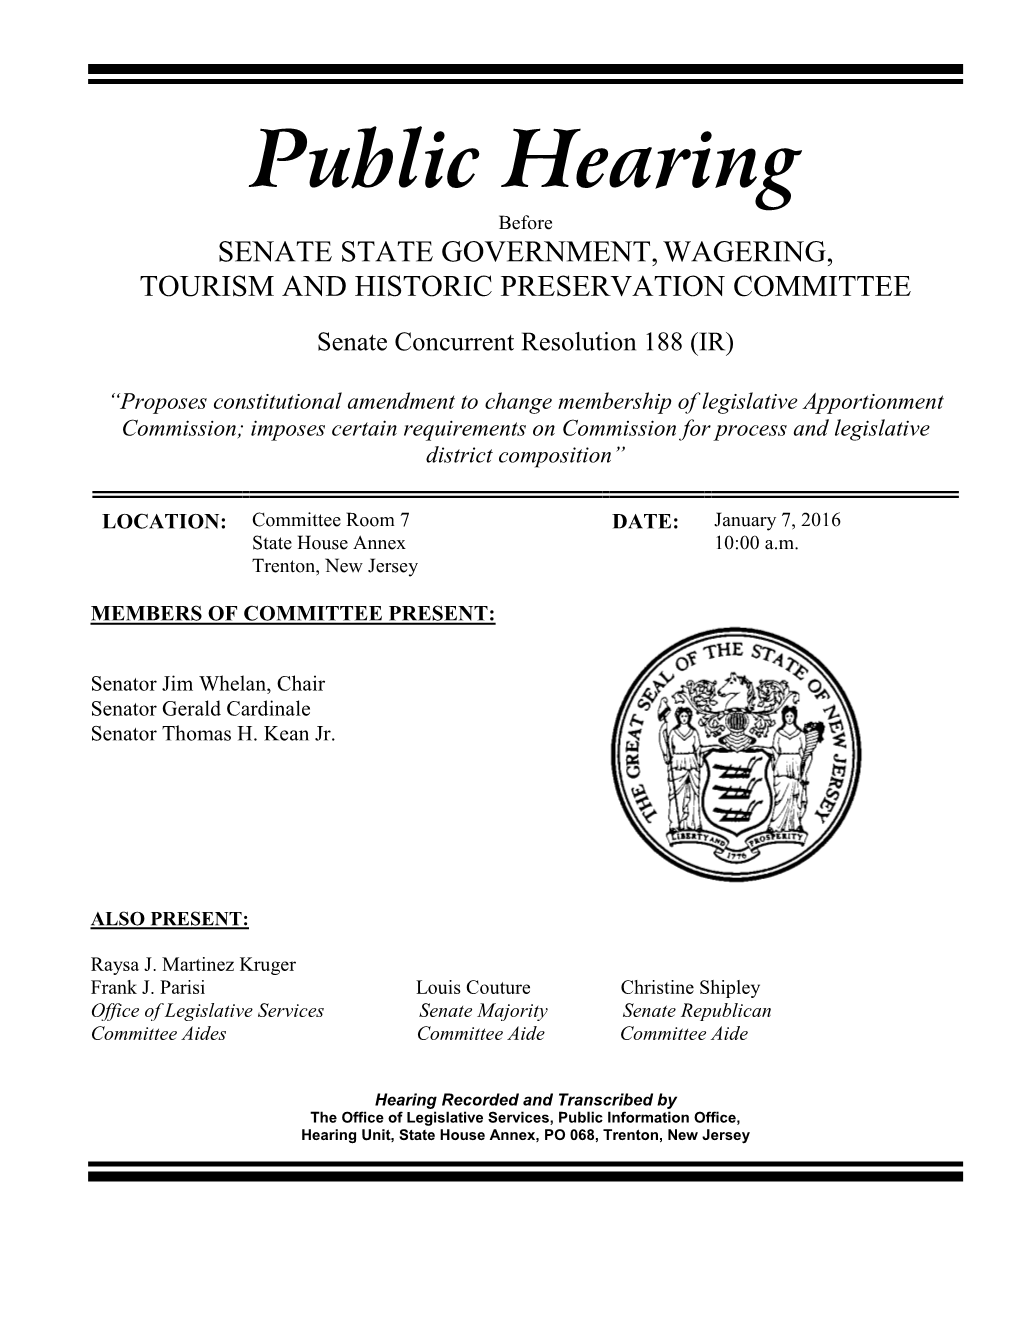 Public Hearing Before SENATE STATE GOVERNMENT, WAGERING, TOURISM and HISTORIC PRESERVATION COMMITTEE